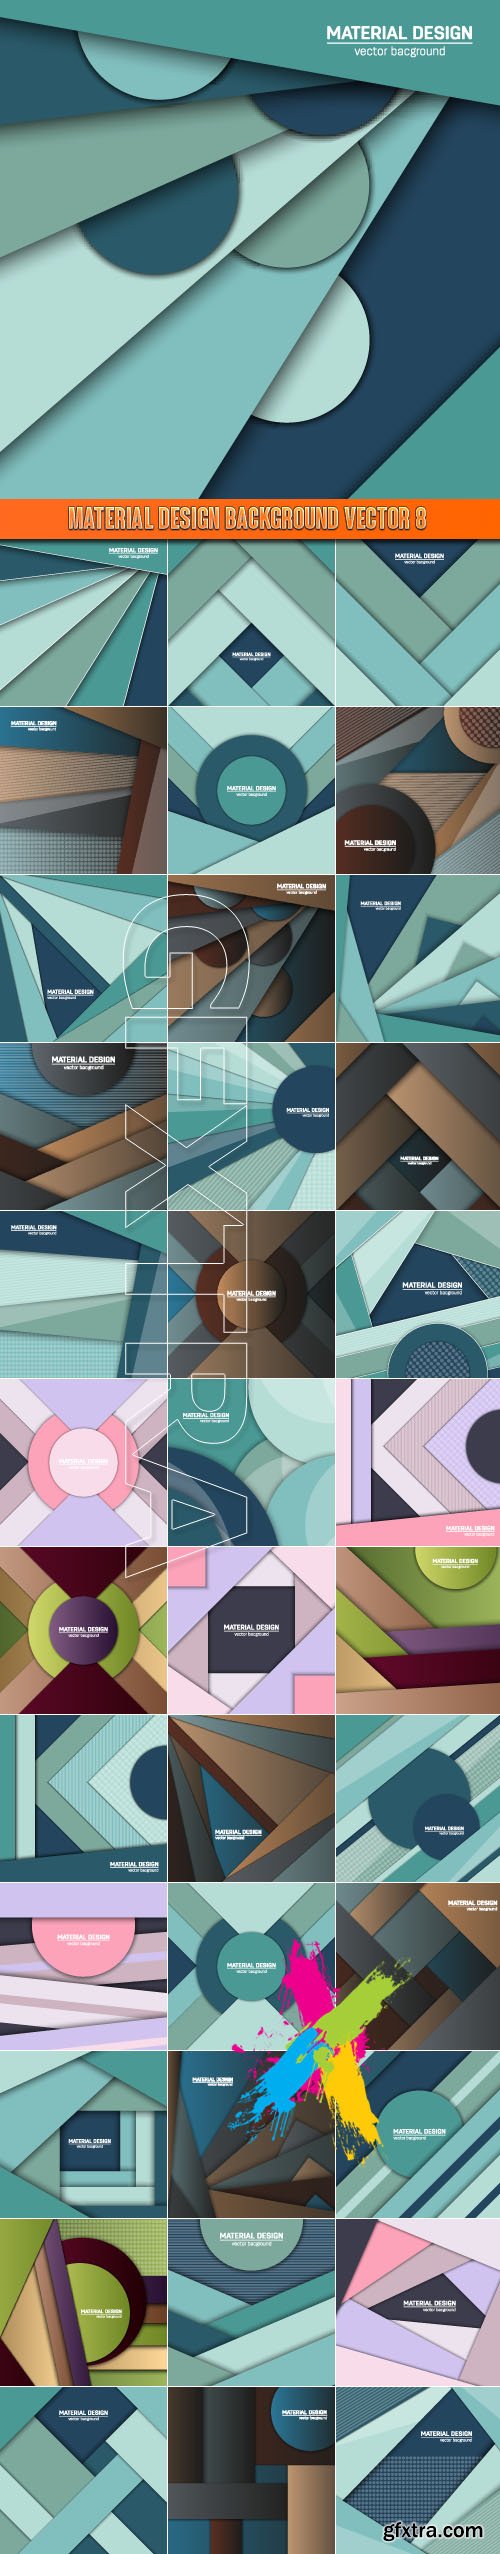 Material design background vector 8